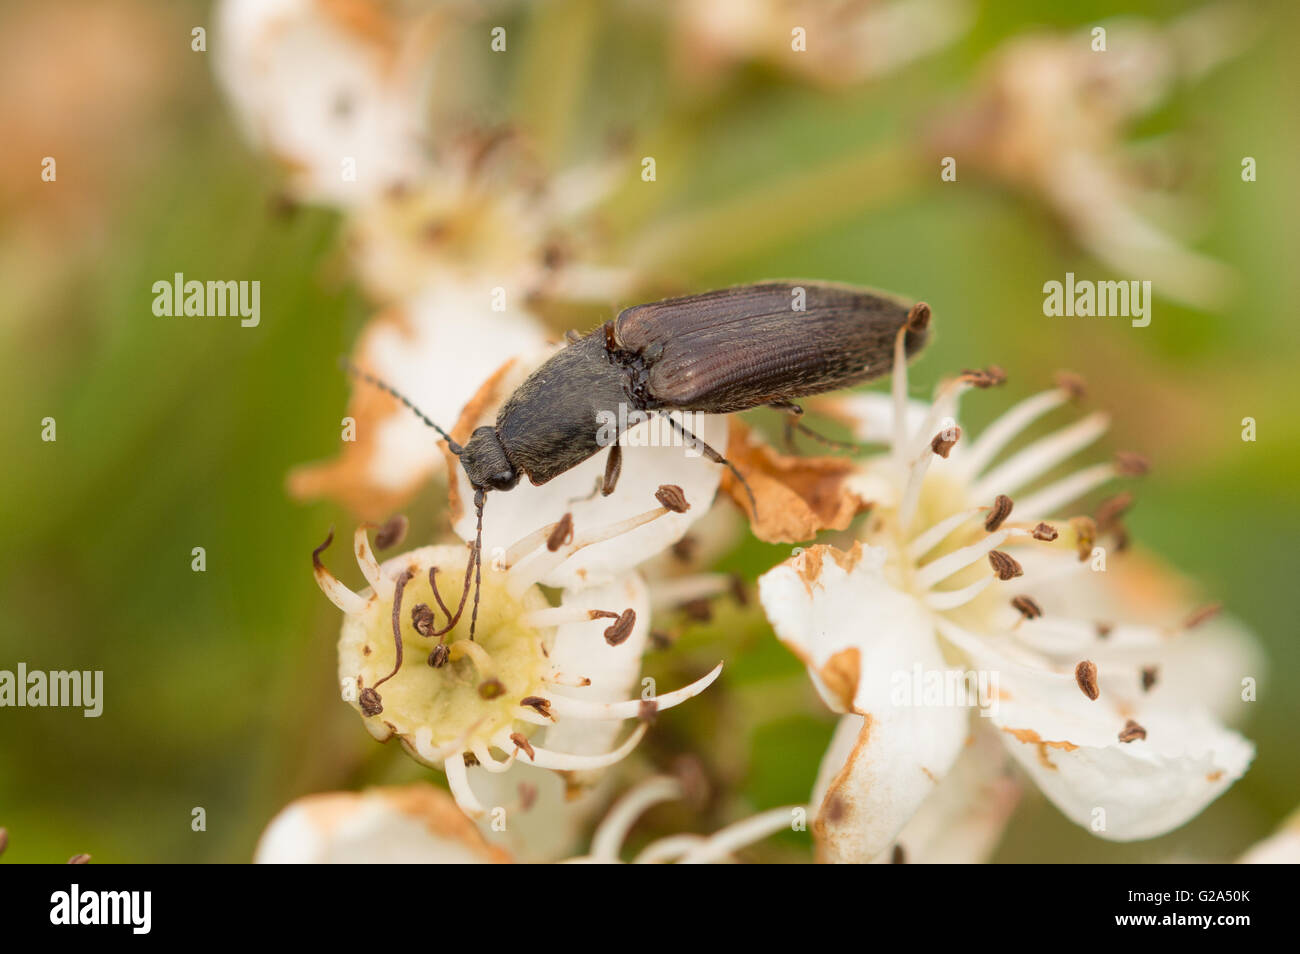 A Click Beetle (Athous haemorrhoidalis) crawling on dried up blossom. Stock Photo